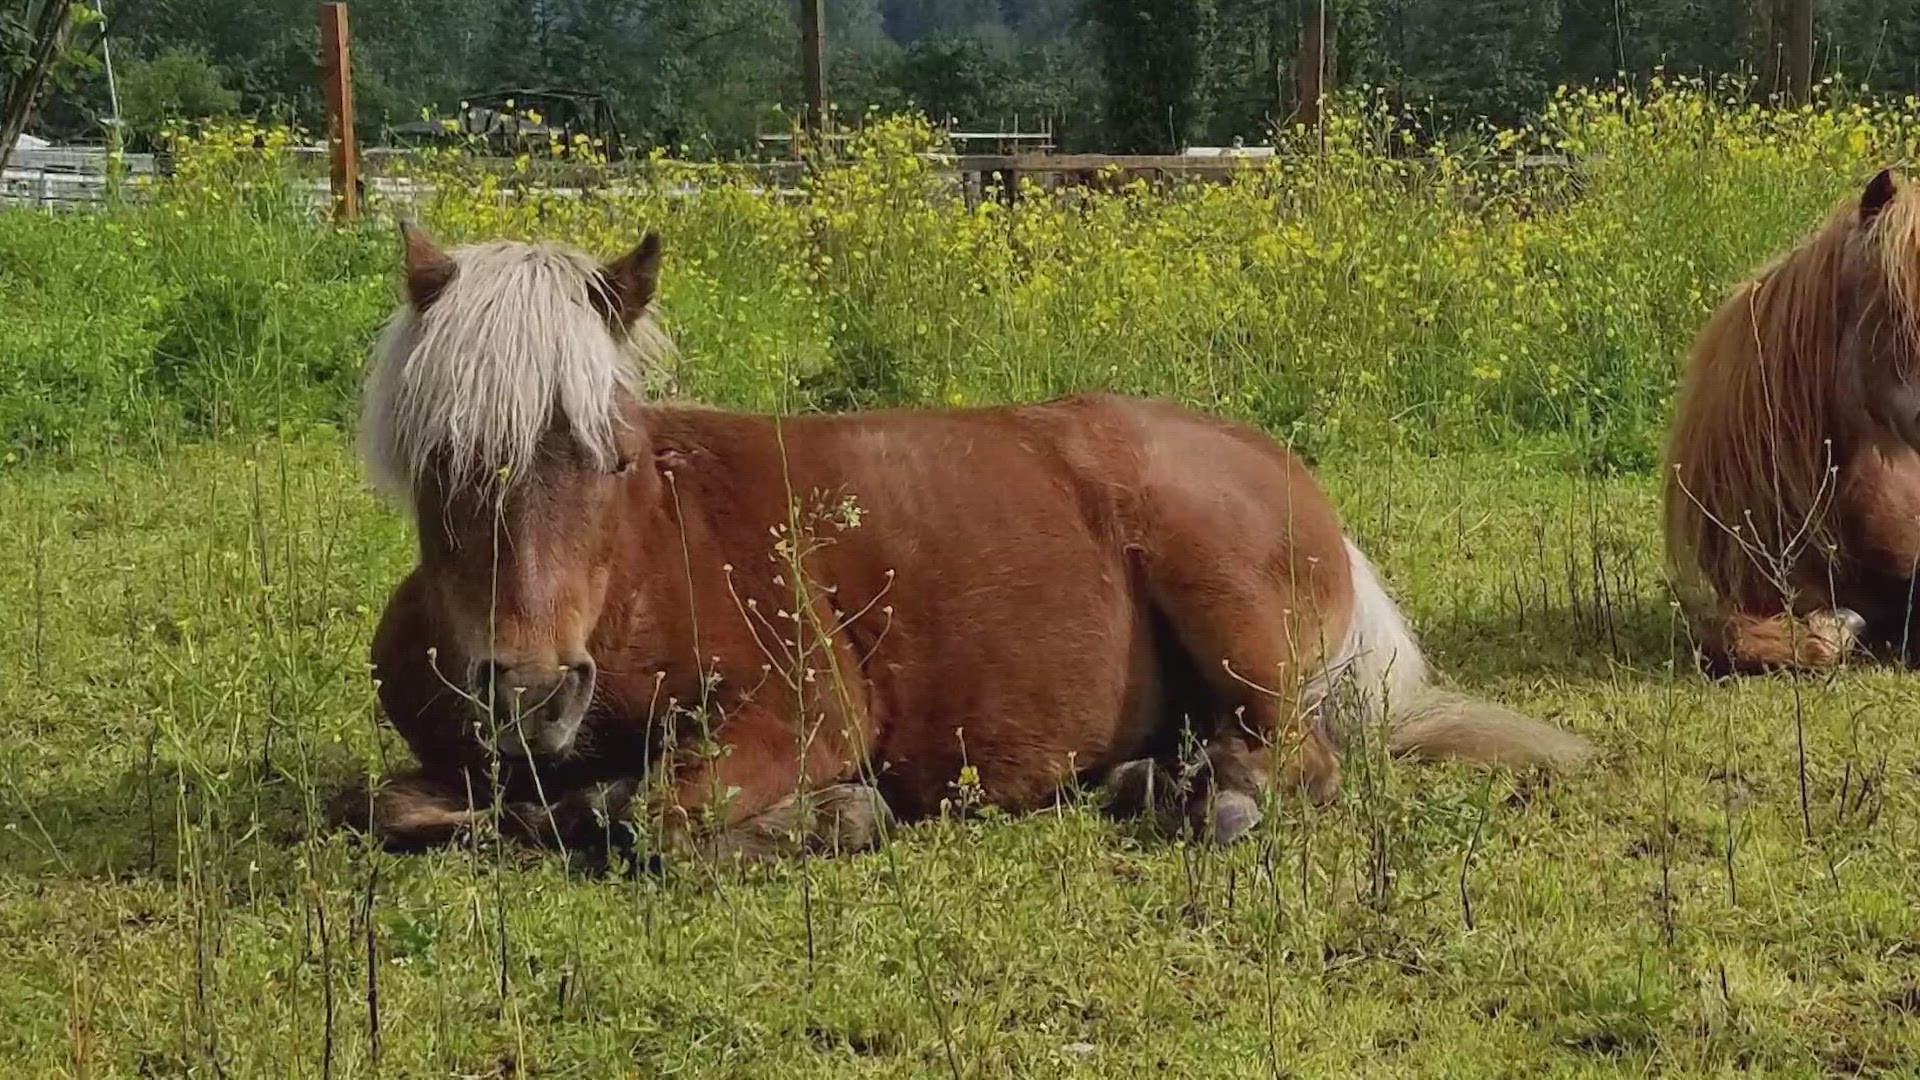 In western Washington, this is the second fatal horse shooting reported to authorities in just 10 weeks.